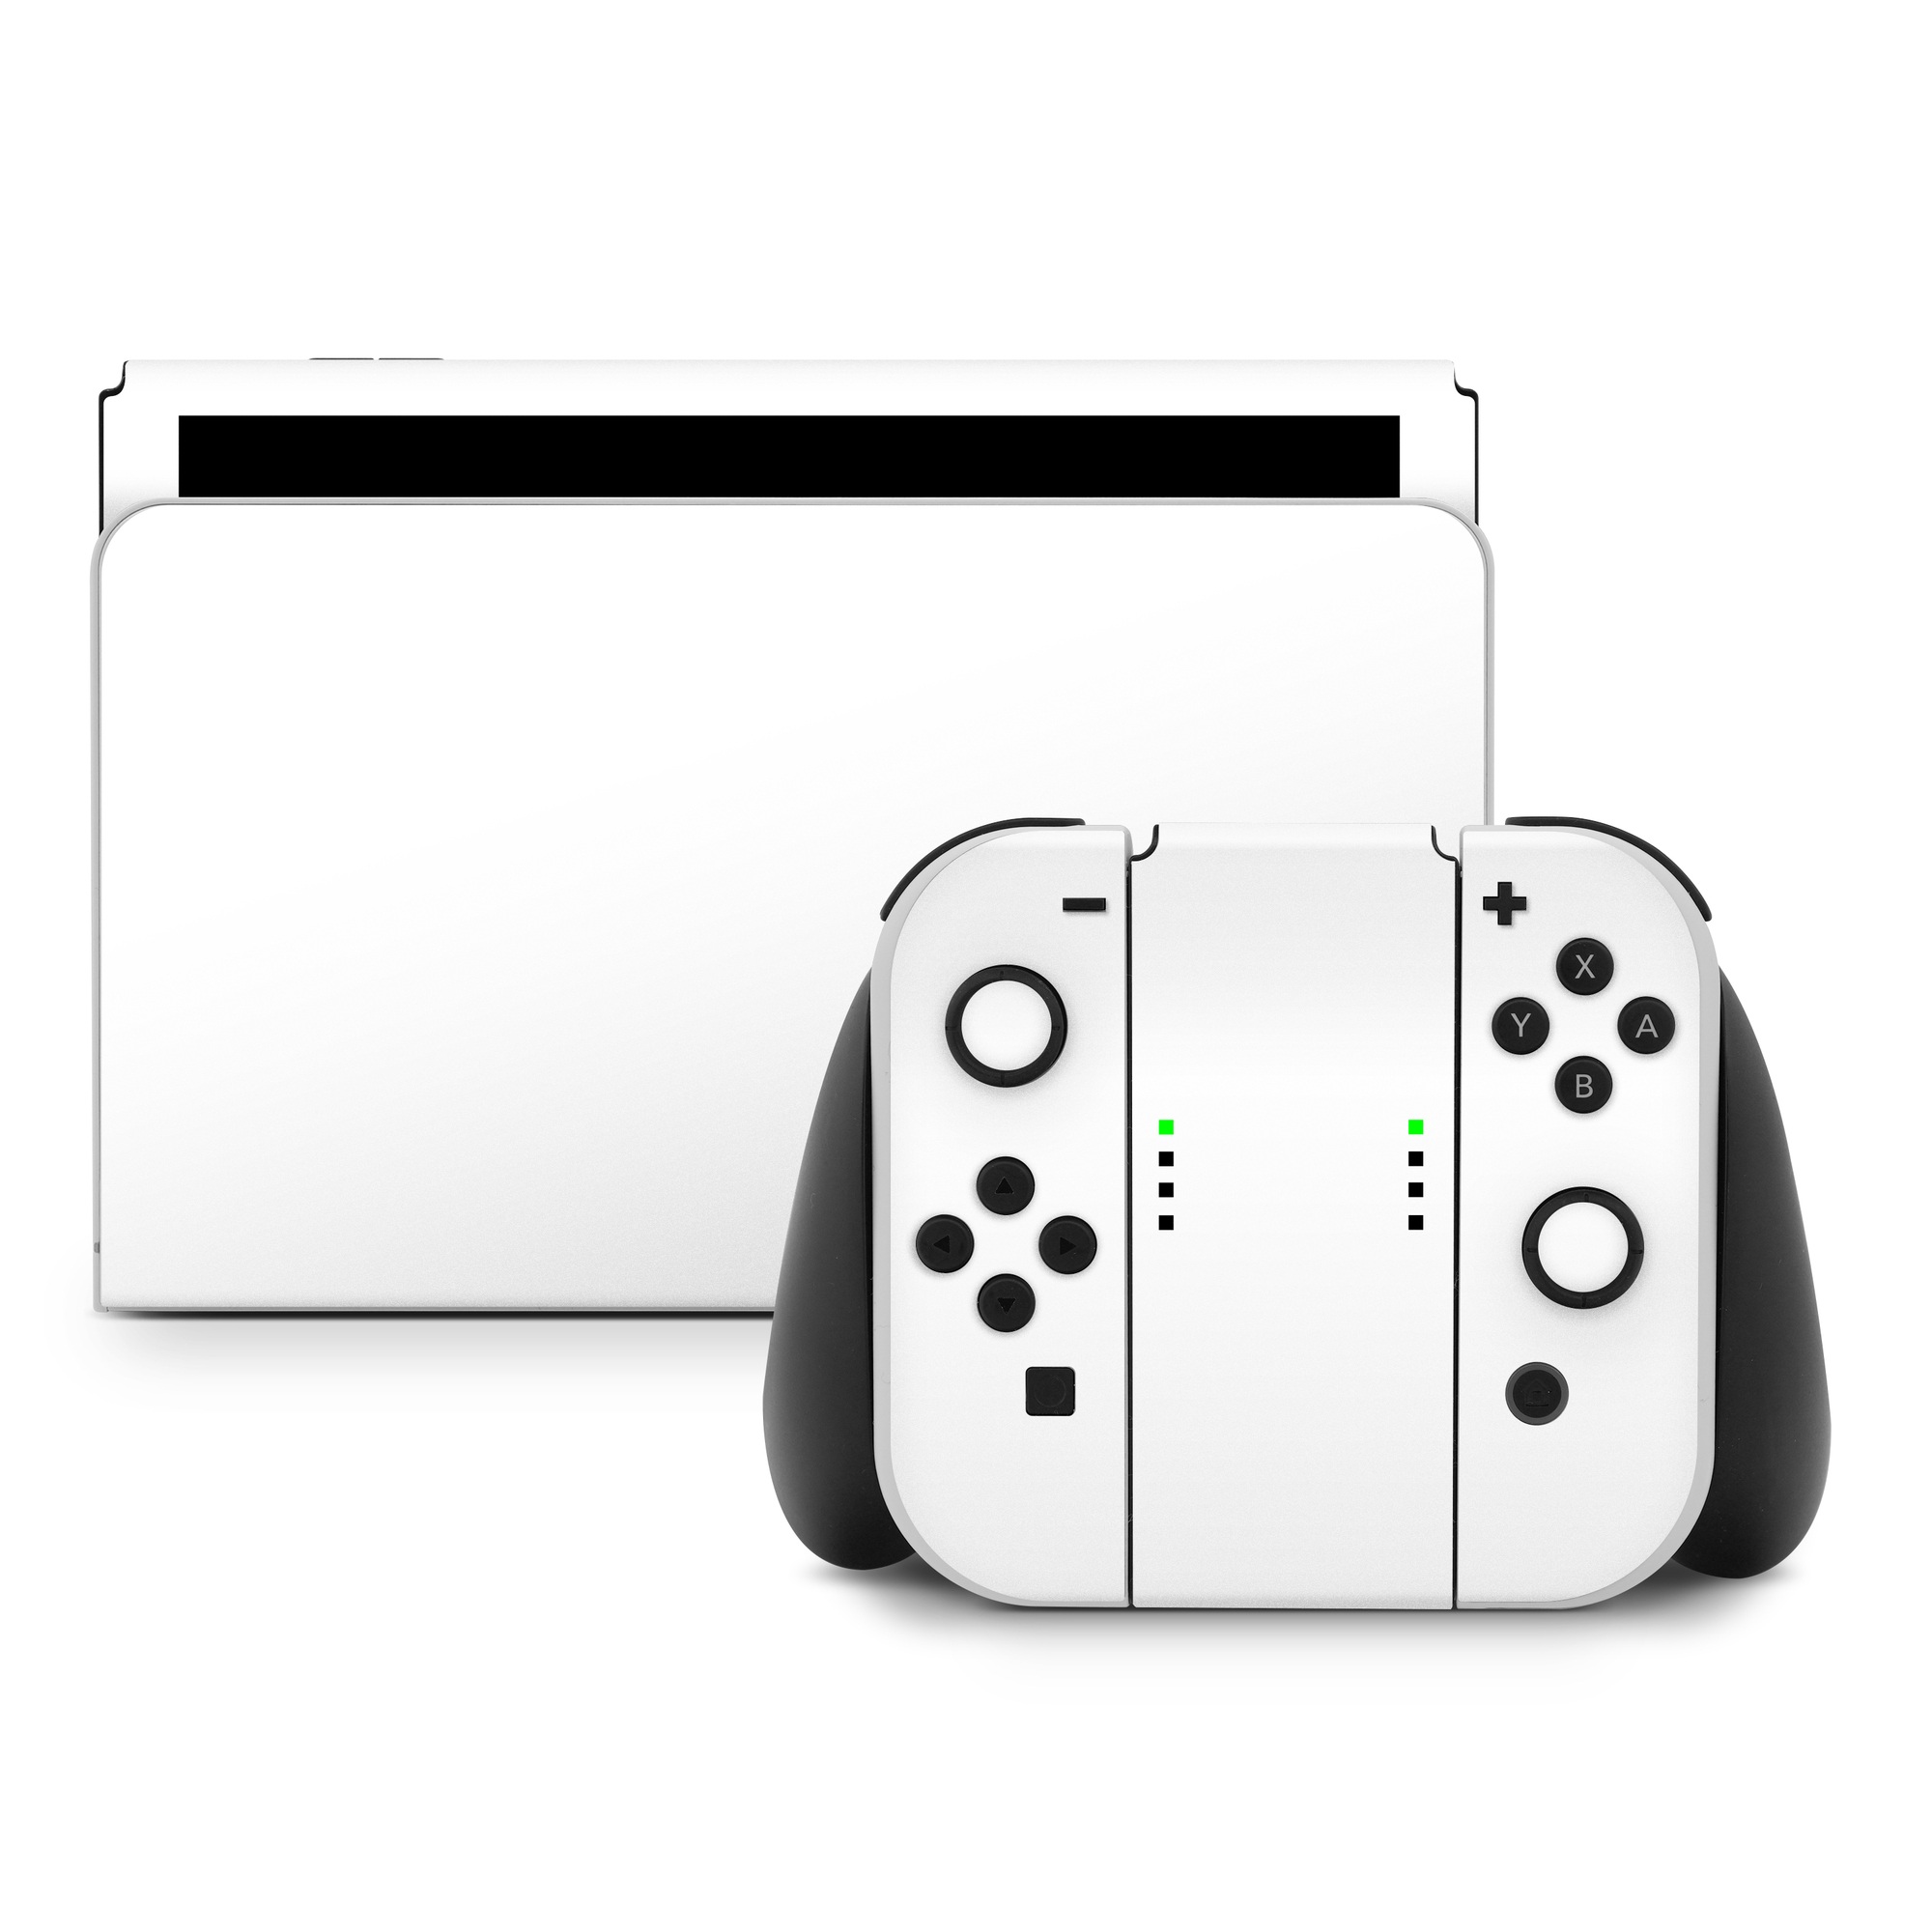 Nintendo Switch Skin - Solid State White (Image 1)